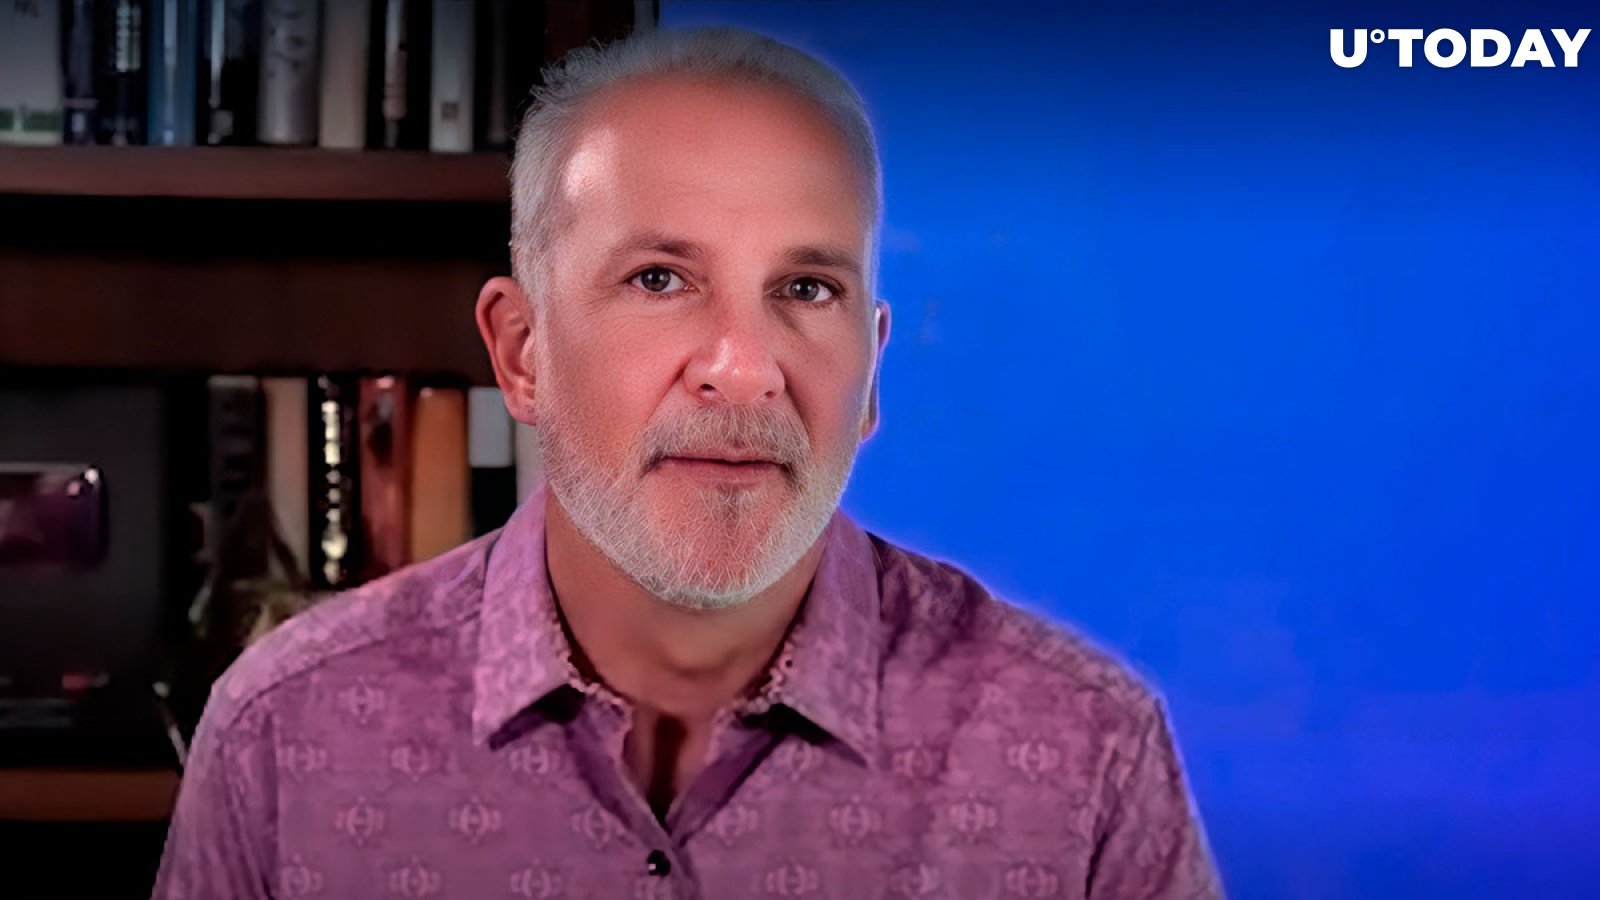 Bitcoin May Test Support Below $10,000 Due to This Pattern Forming: Peter Schiff